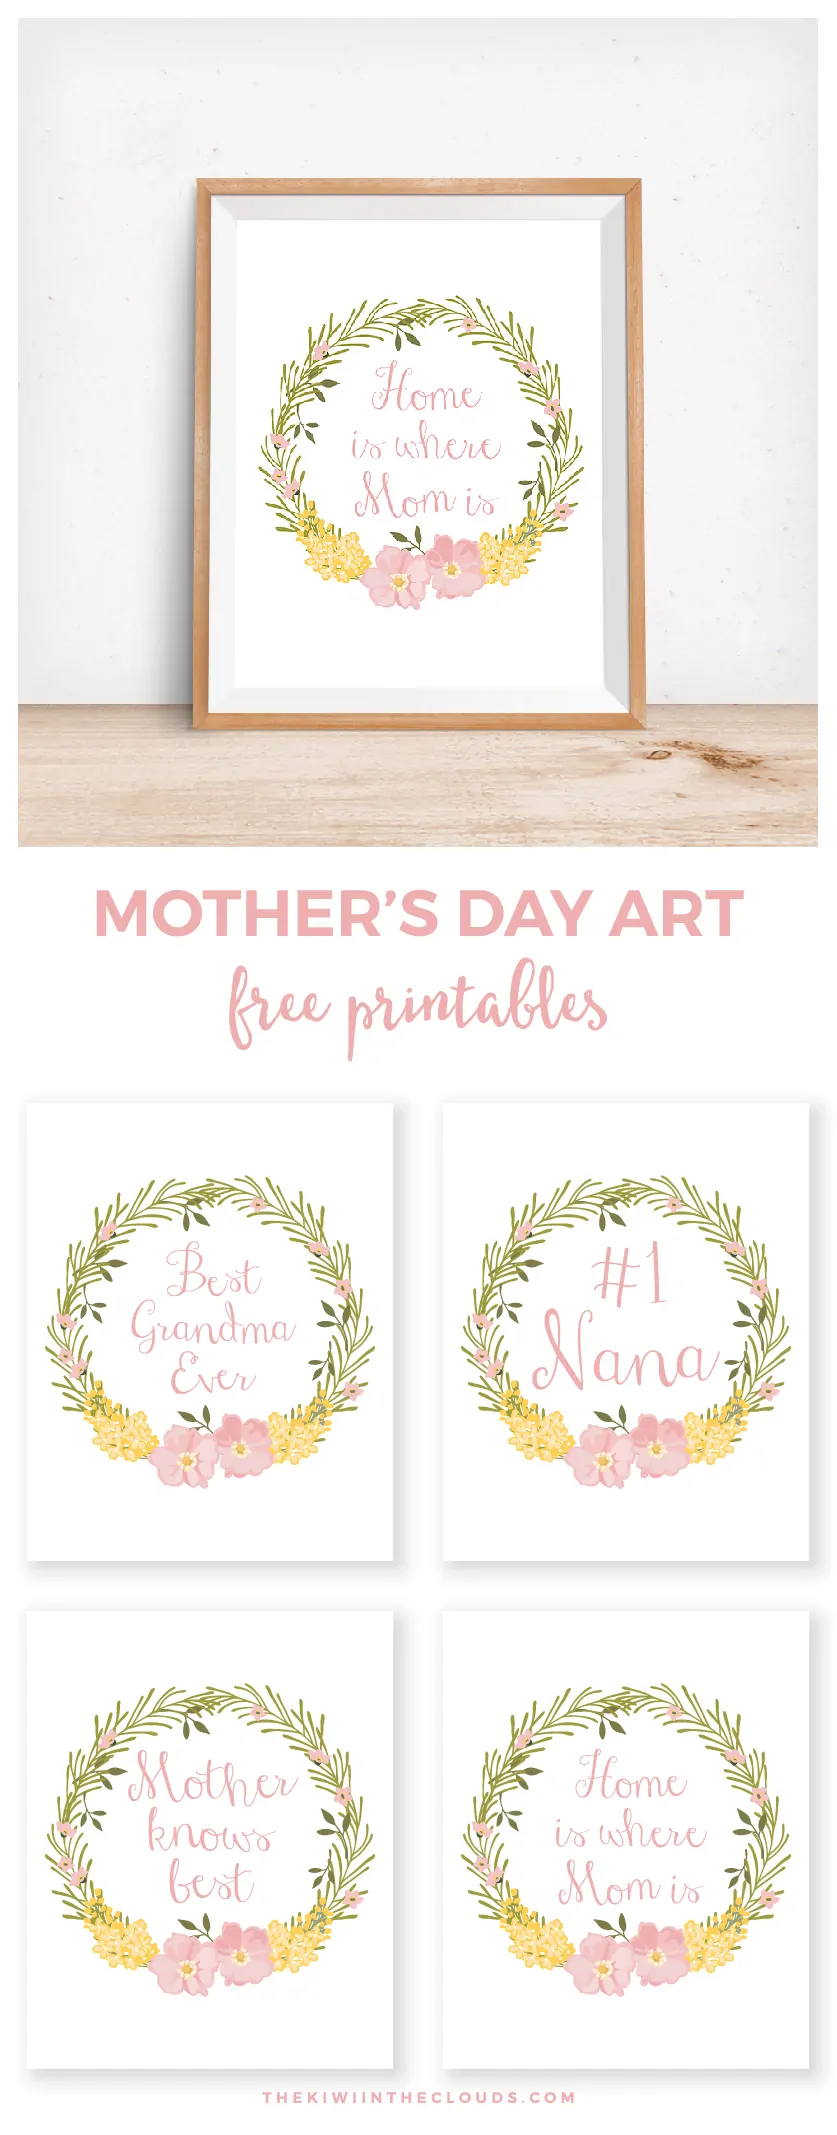 Mother's Day Free Printable Art | Click through to download 4 FREE 8x10 mother's day prints for mom, grandma and nana!